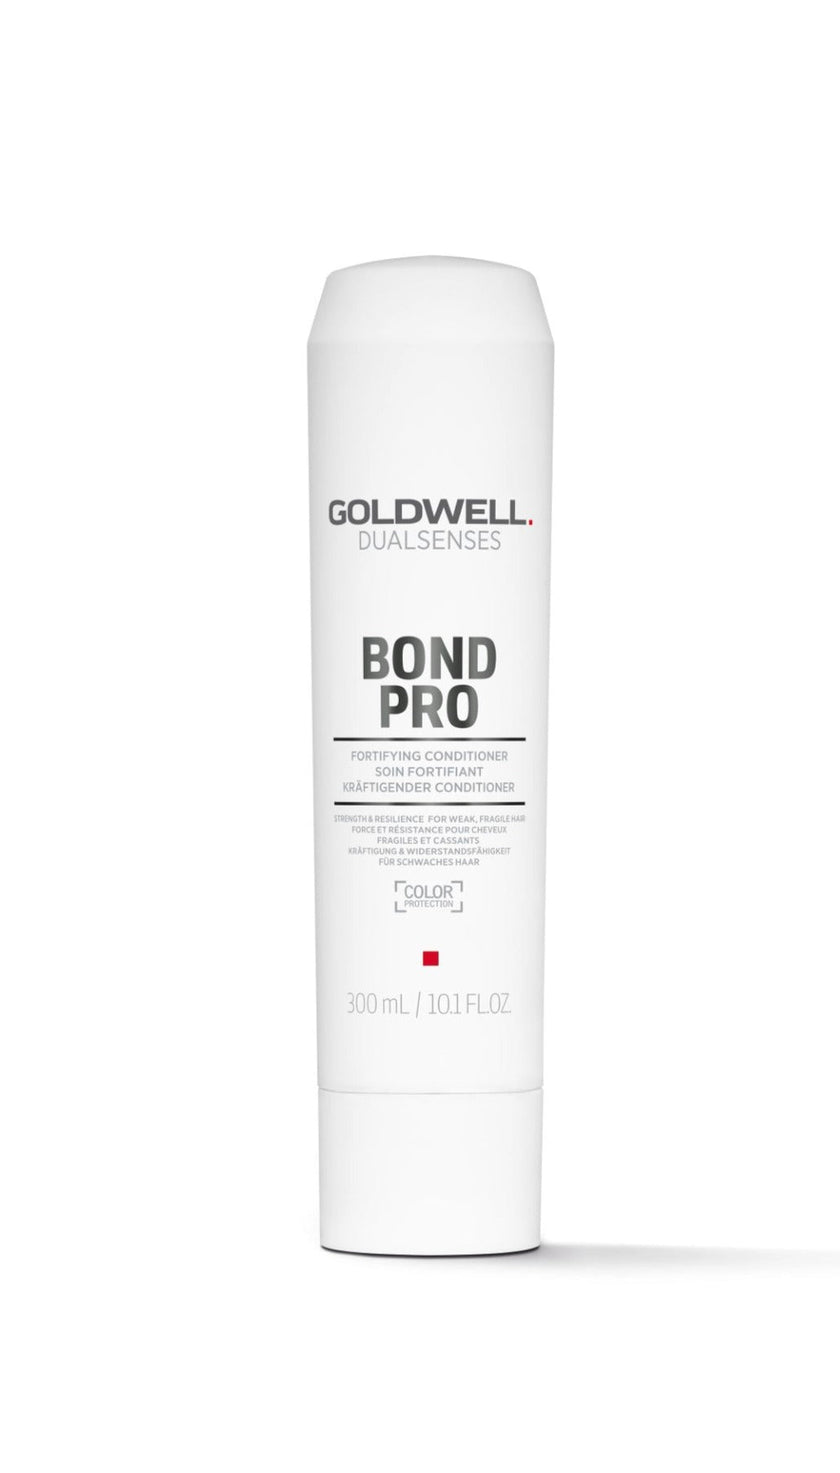 Dualsenses Bond Pro Fortifying Conditioner Image